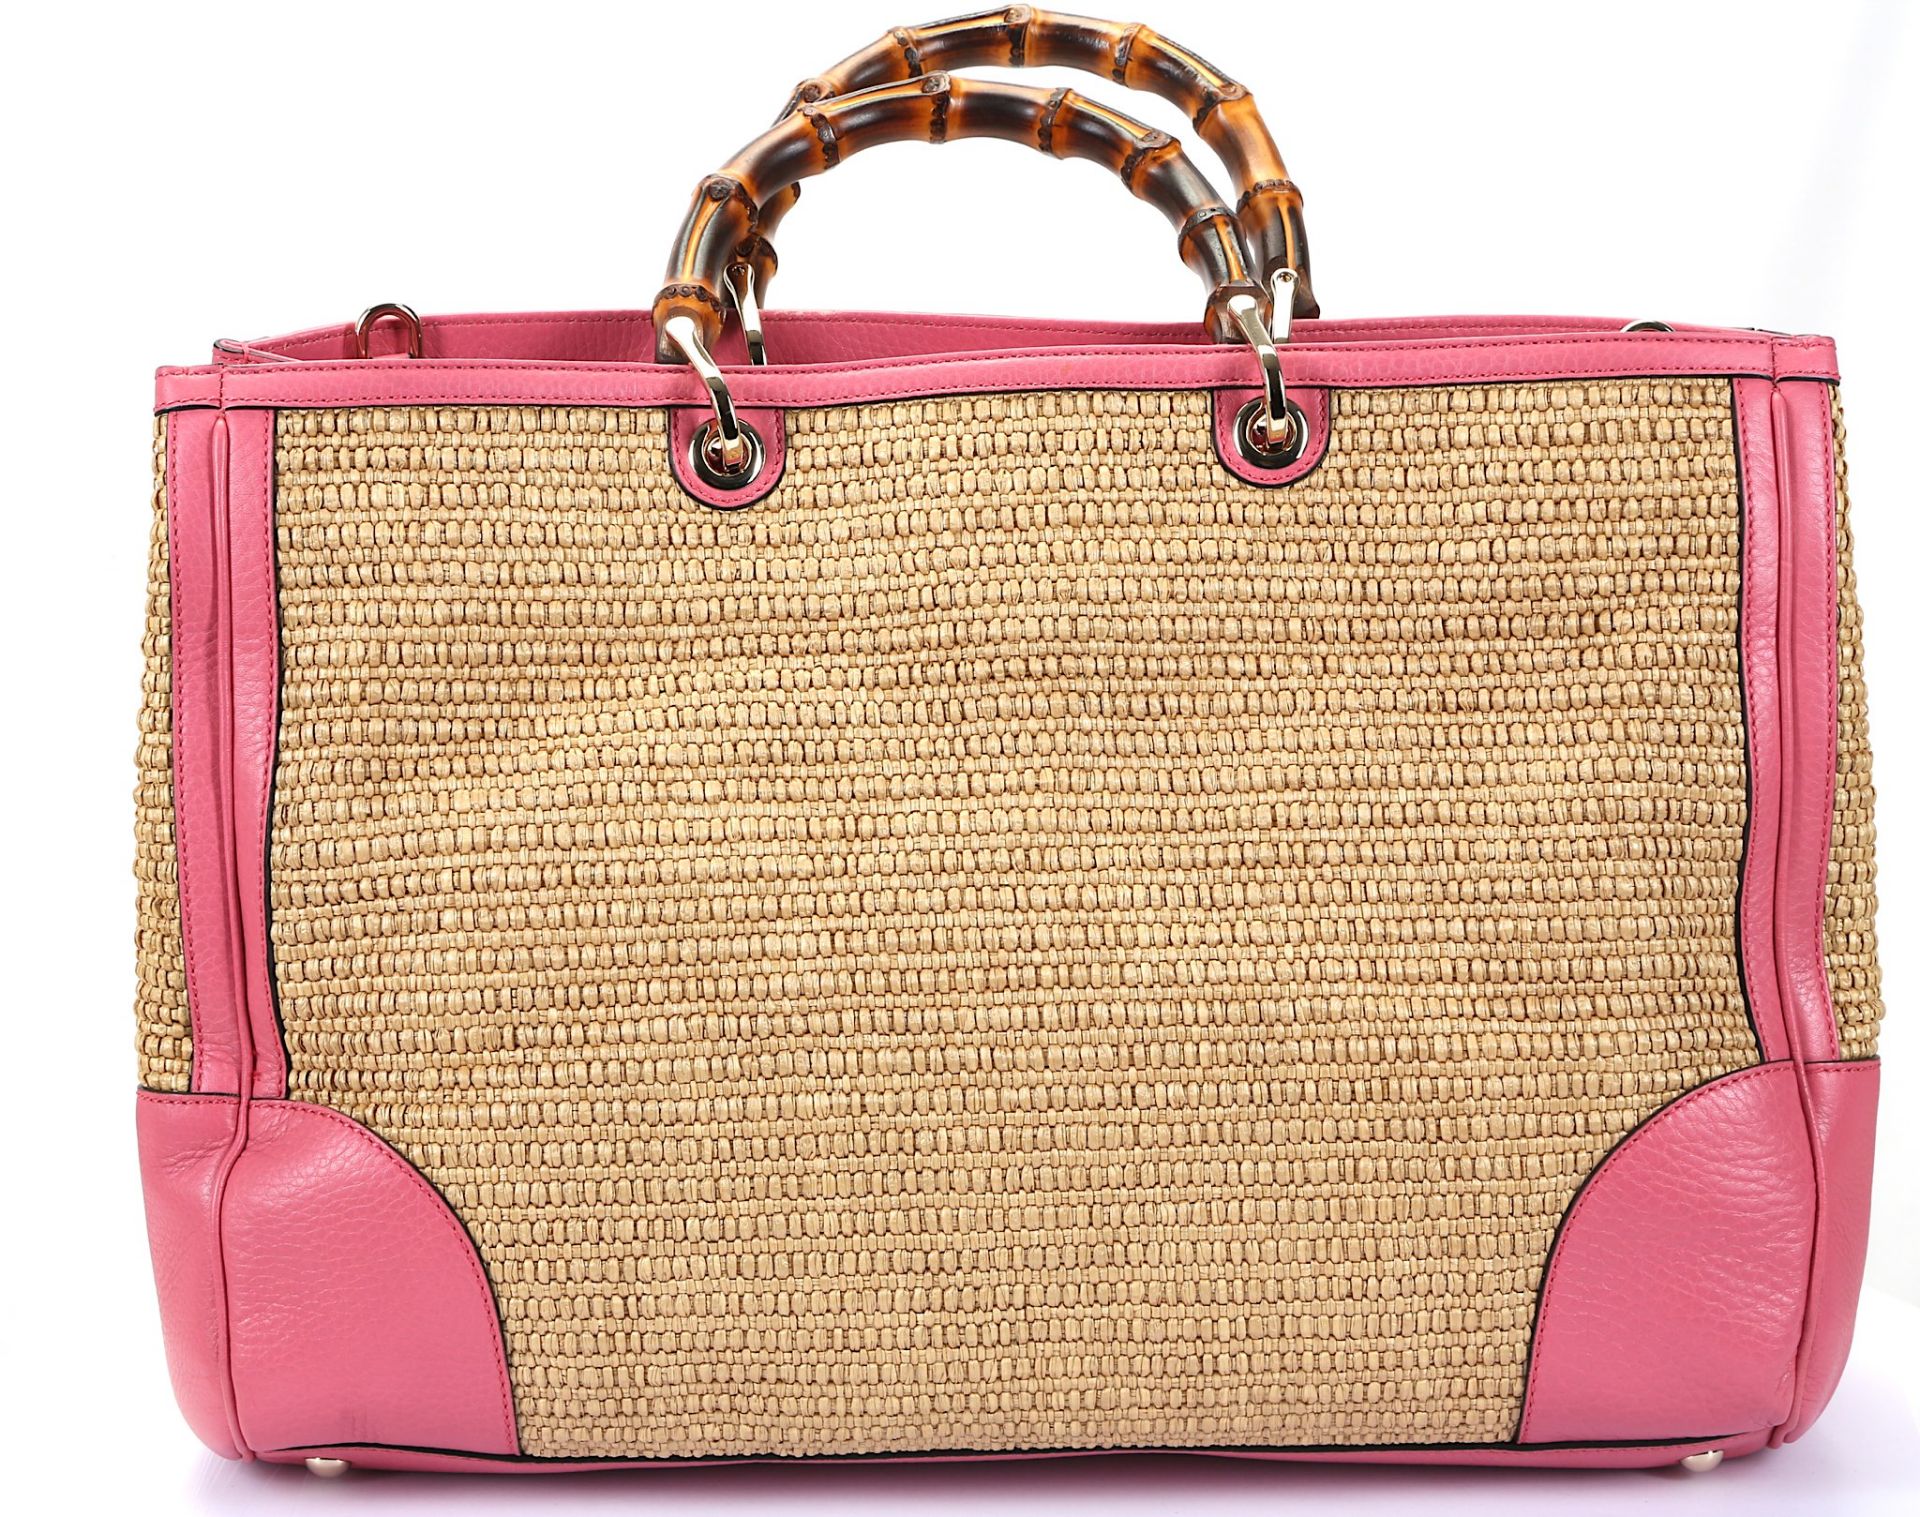 Gucci Pink Straw Bamboo Large Shopper Tote, pink leather and woven straw with bamboo handles, gold - Image 4 of 5